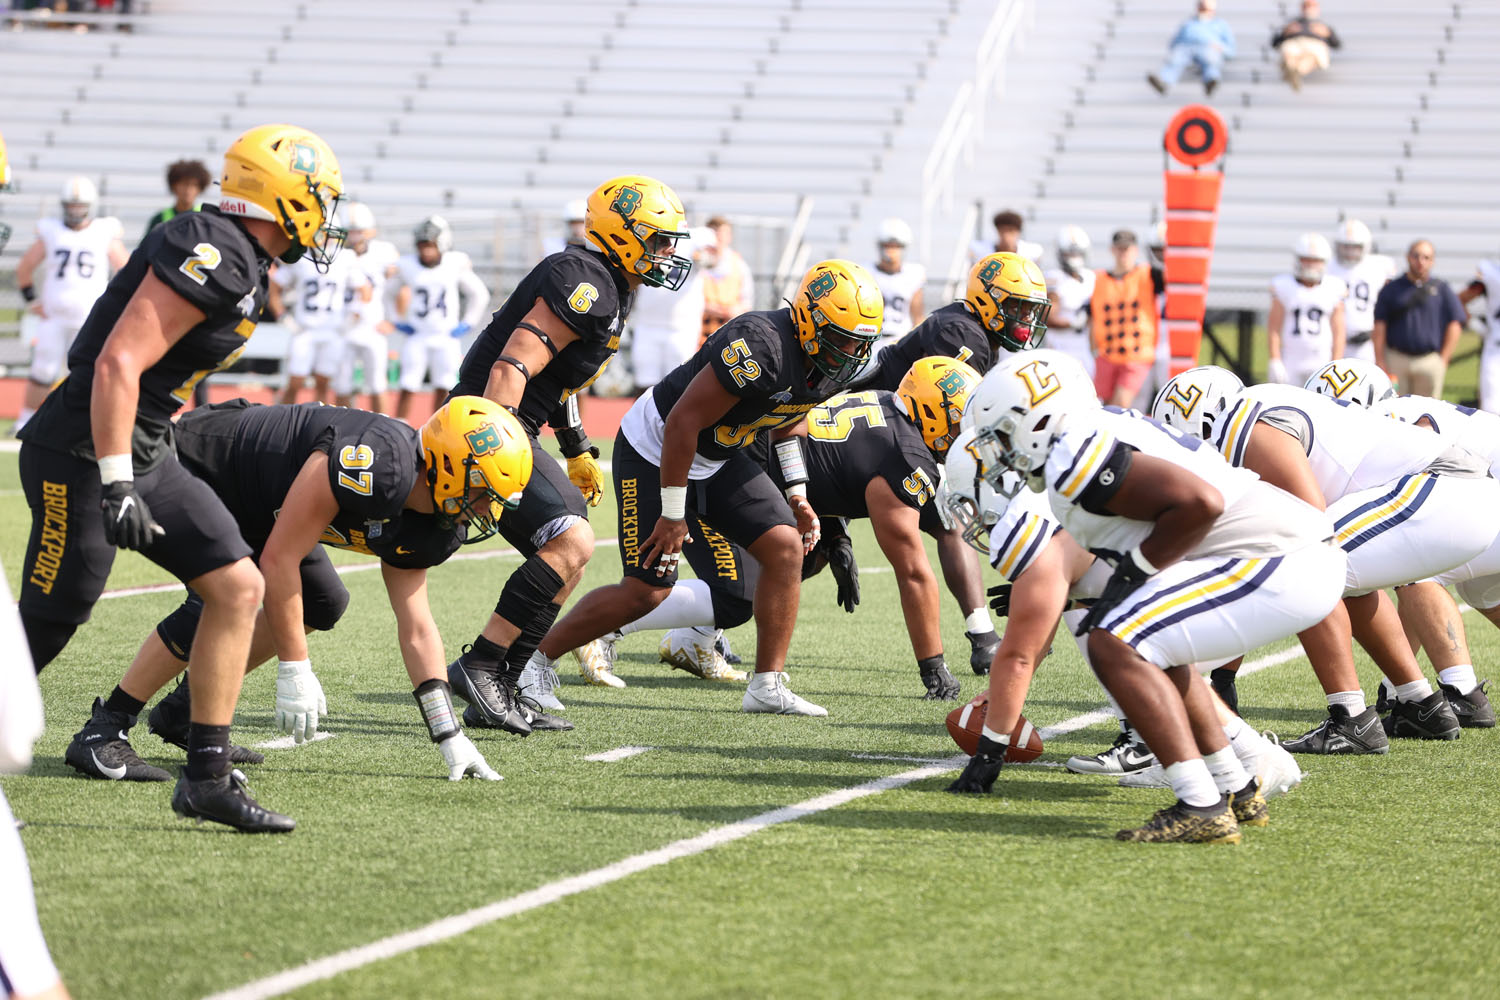 The Brockport defense ready and set for the play